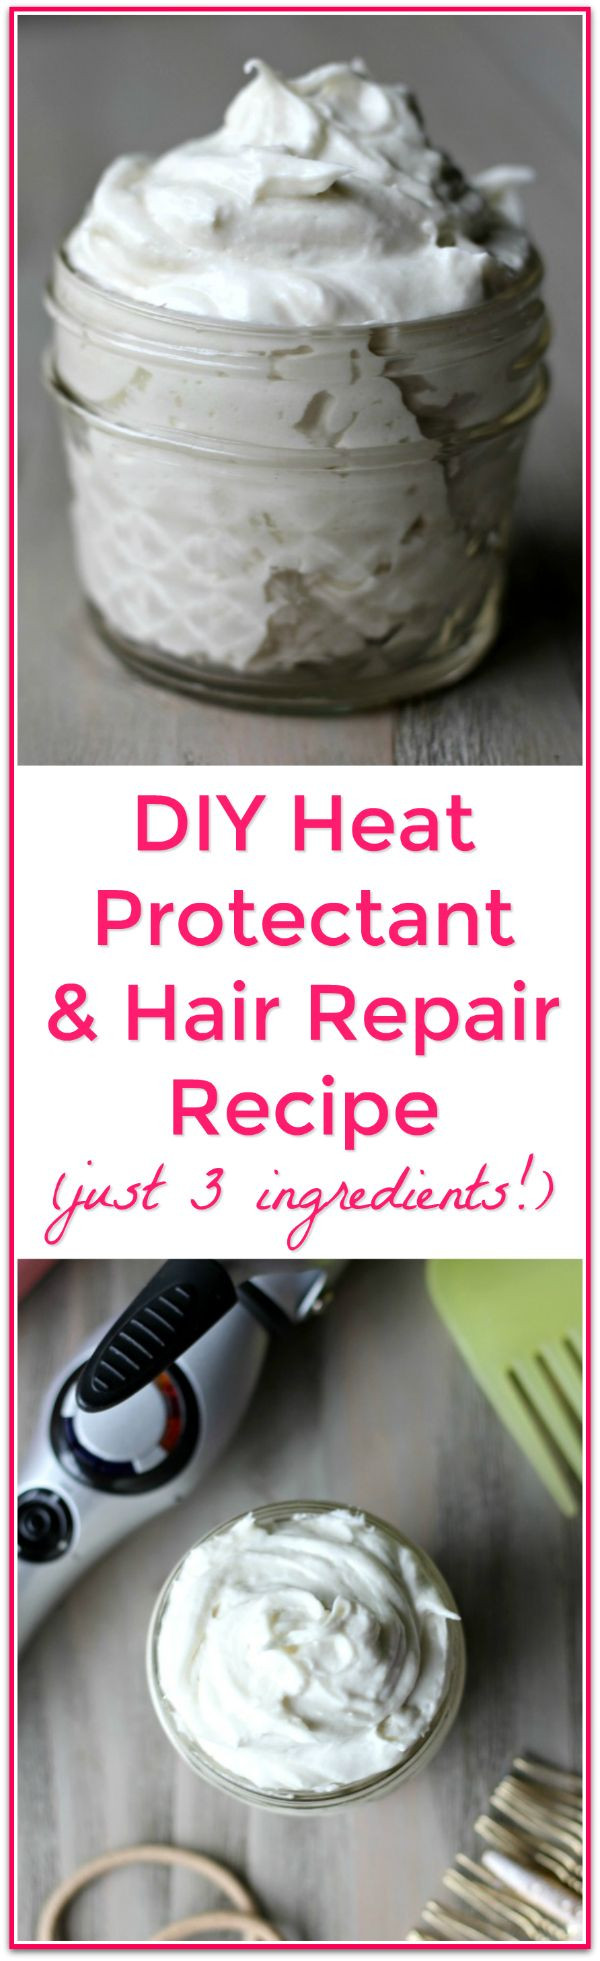 DIY Heat Protectant For Hair
 1000 ideas about Heat Damage on Pinterest